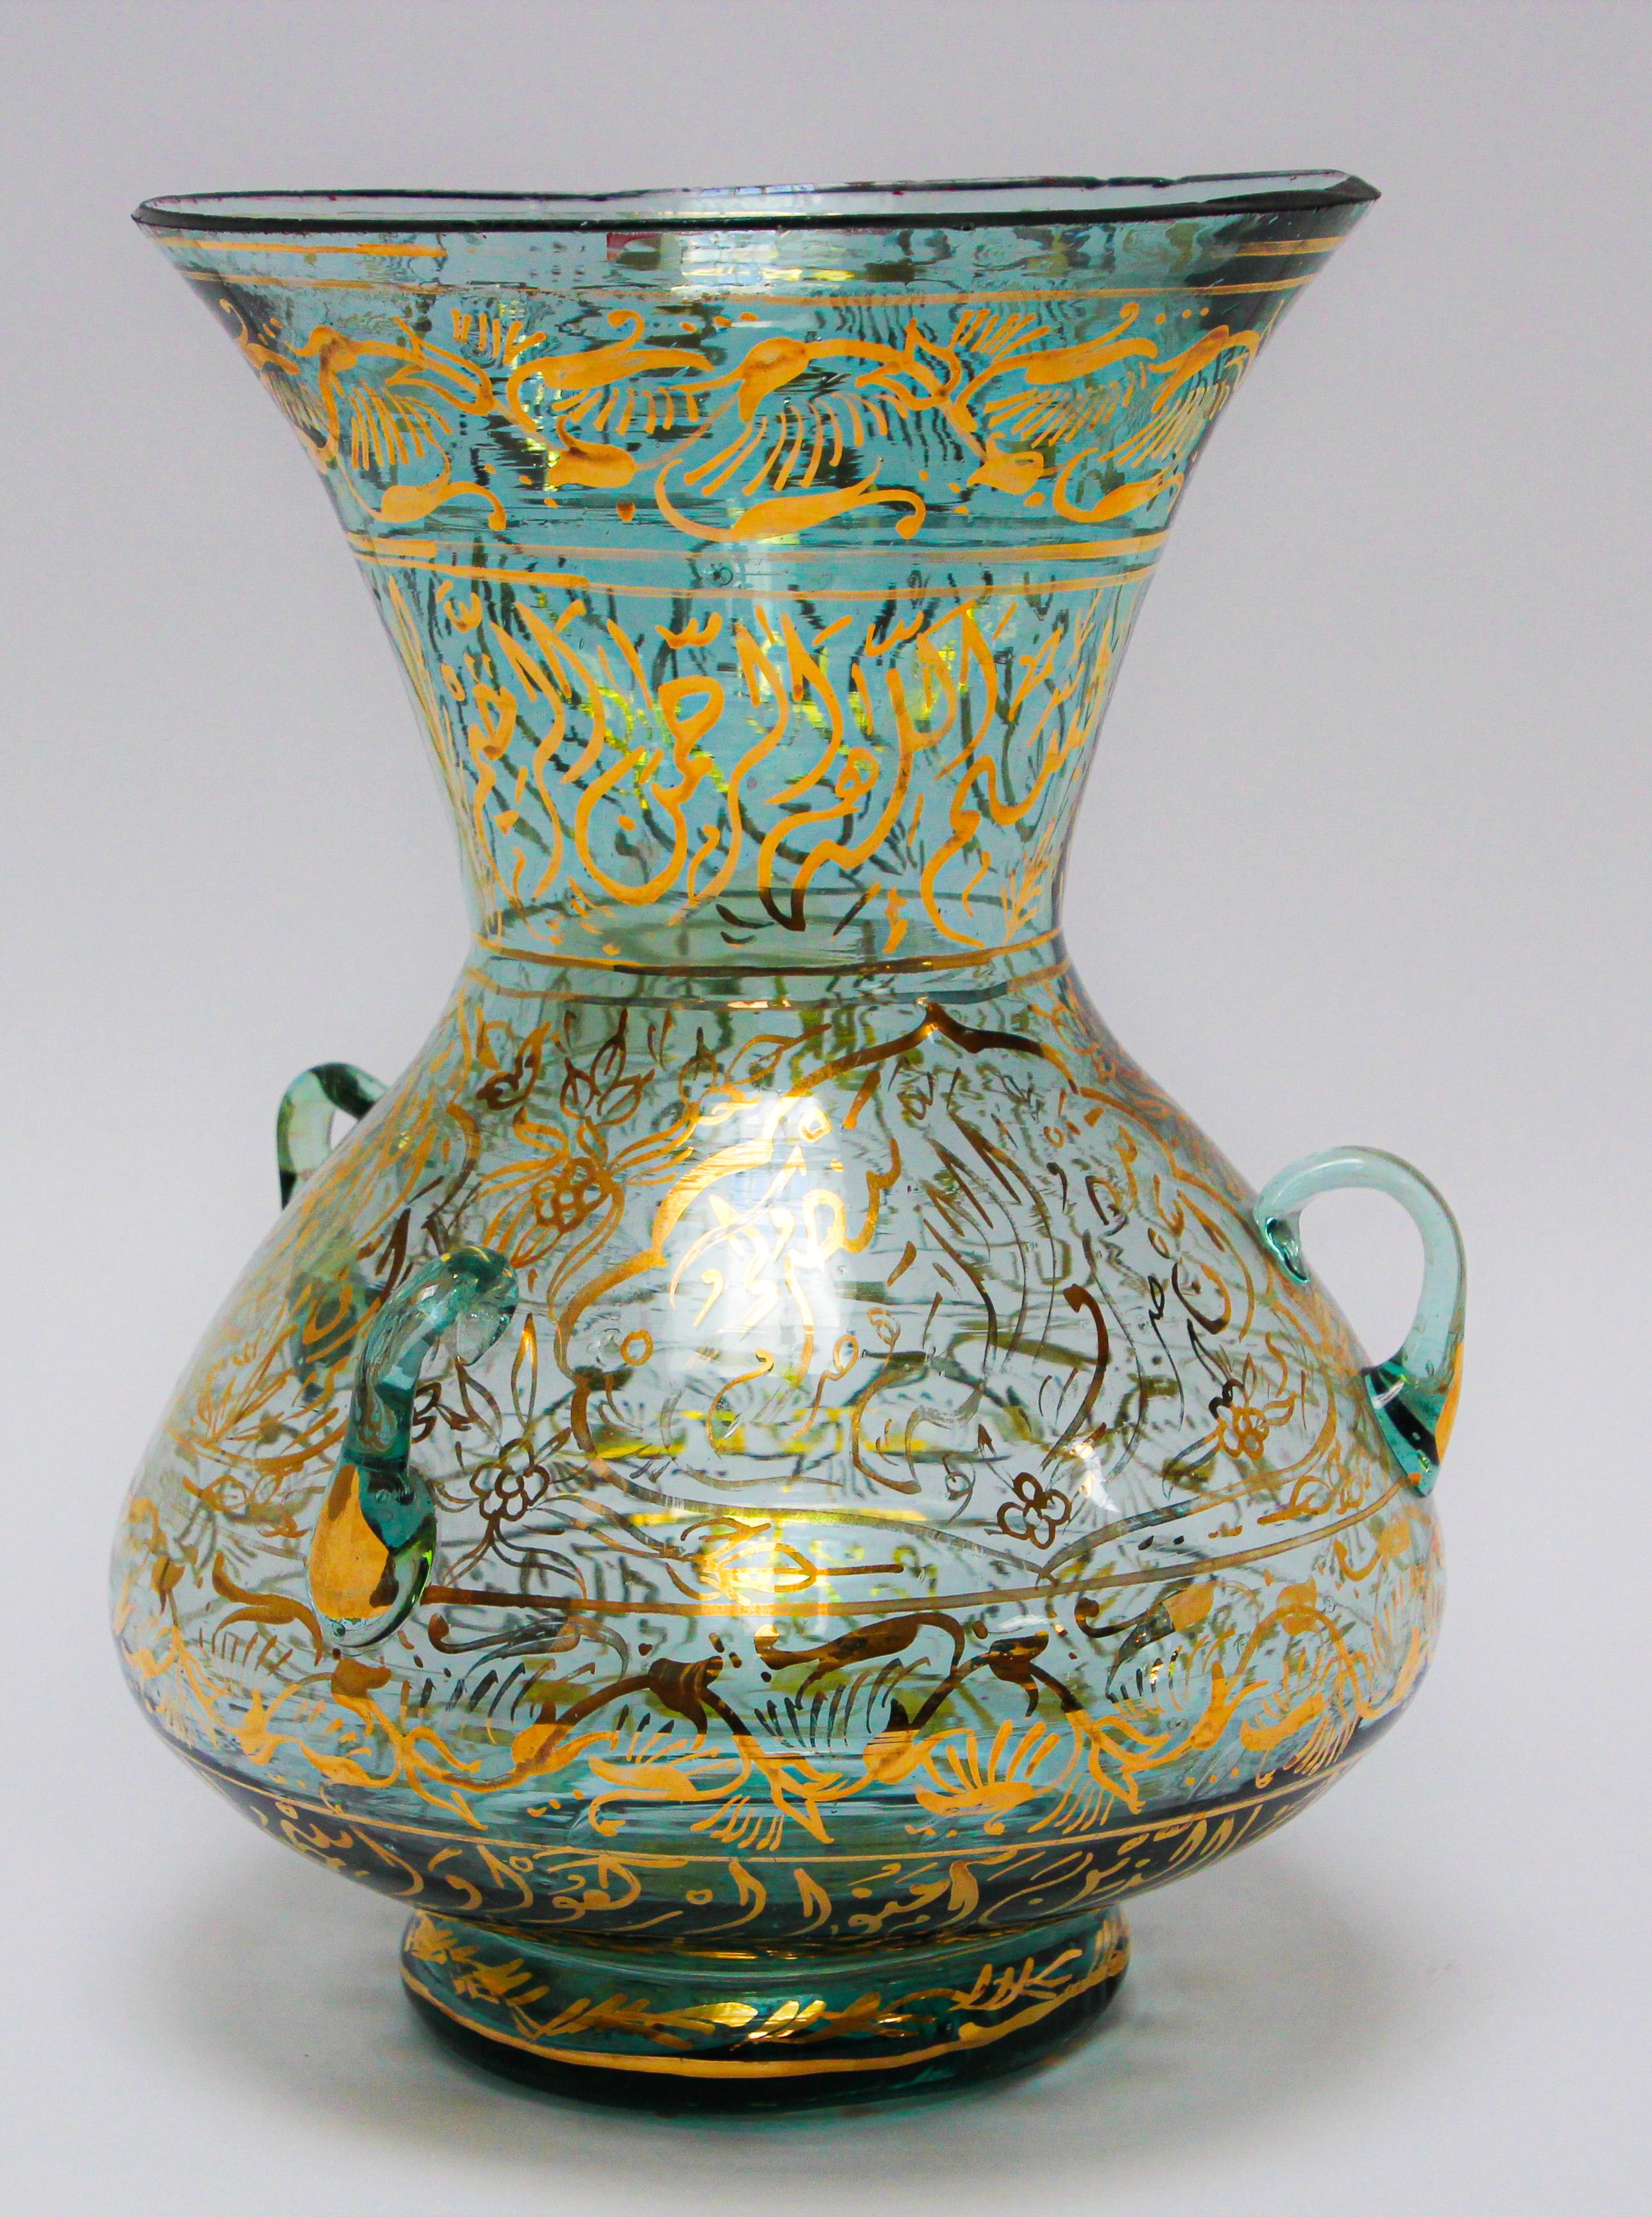 Art Glass Handblown Mosque Glass Lamp in Mameluke Style Gilded with Arabic Calligraphy